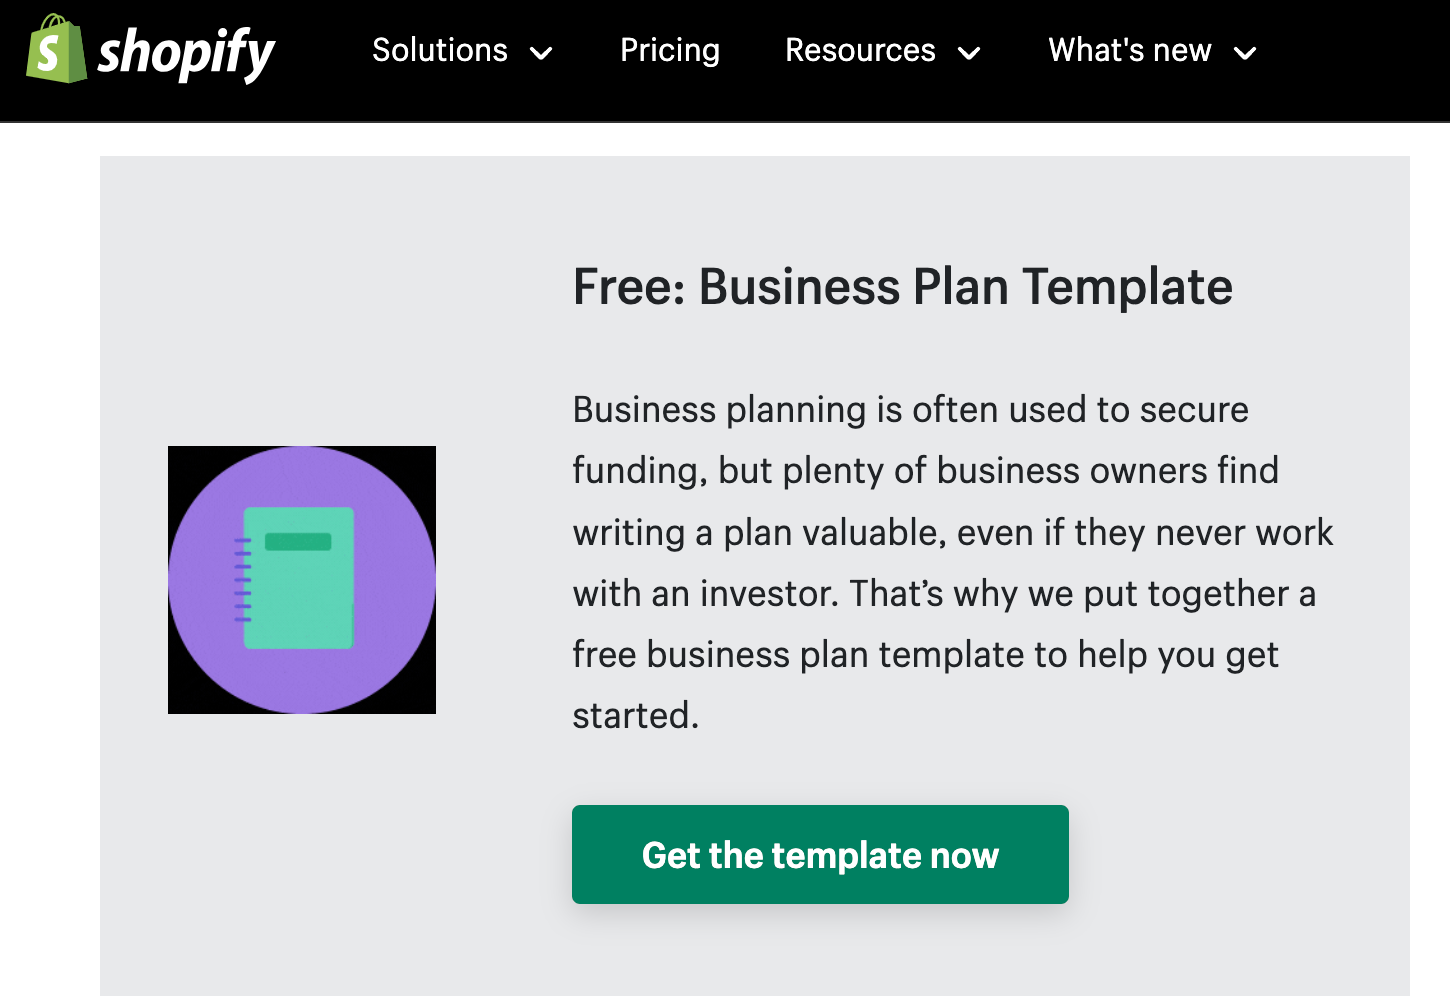 Shopify's "Free: Business Plan Template" page with green "Get the template now" button